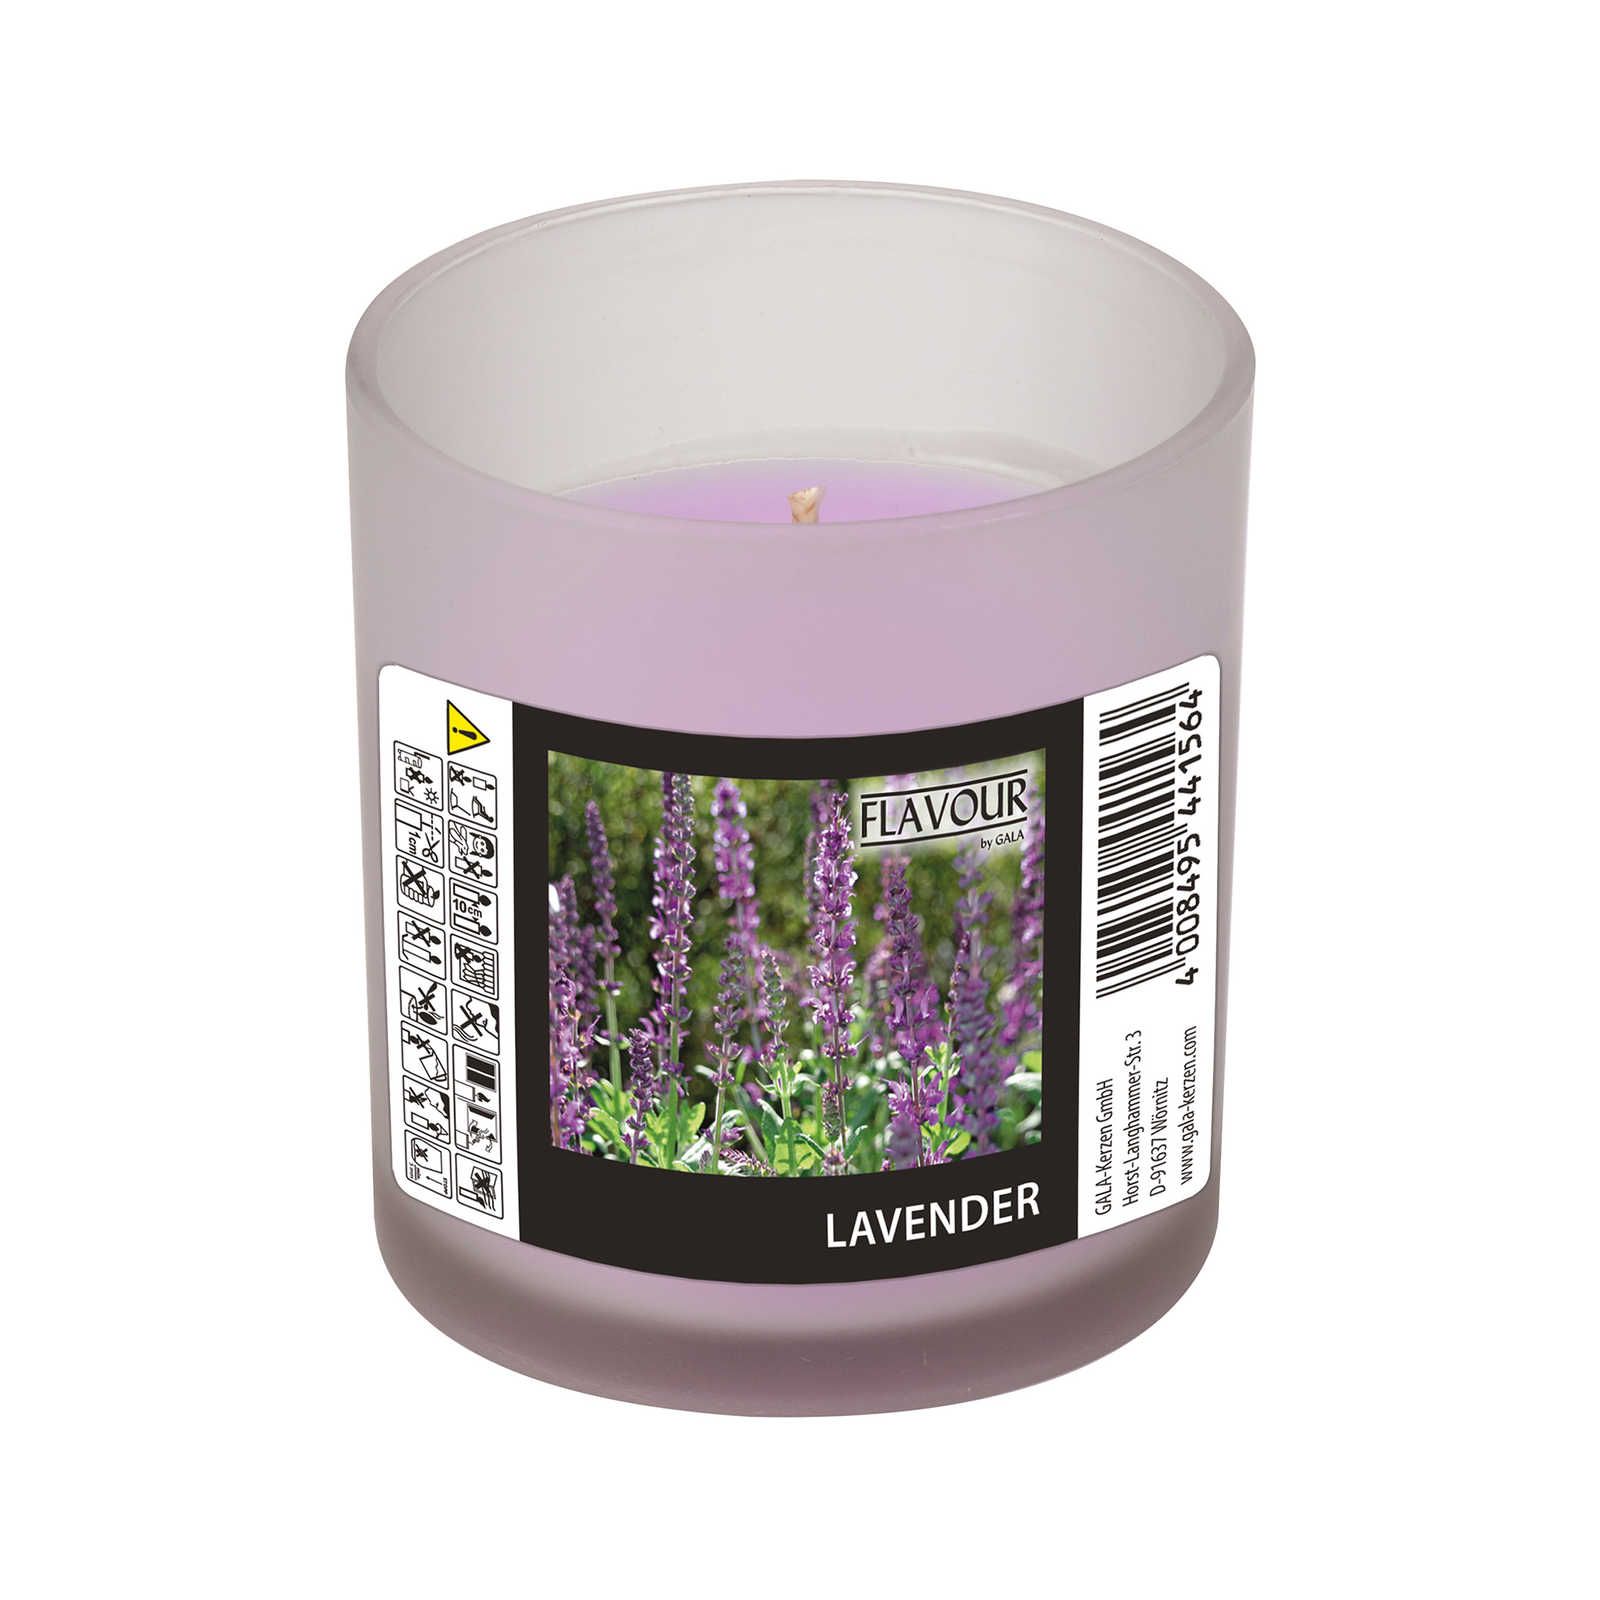             Lavender scented candle with delicate fragrance - 110g
        